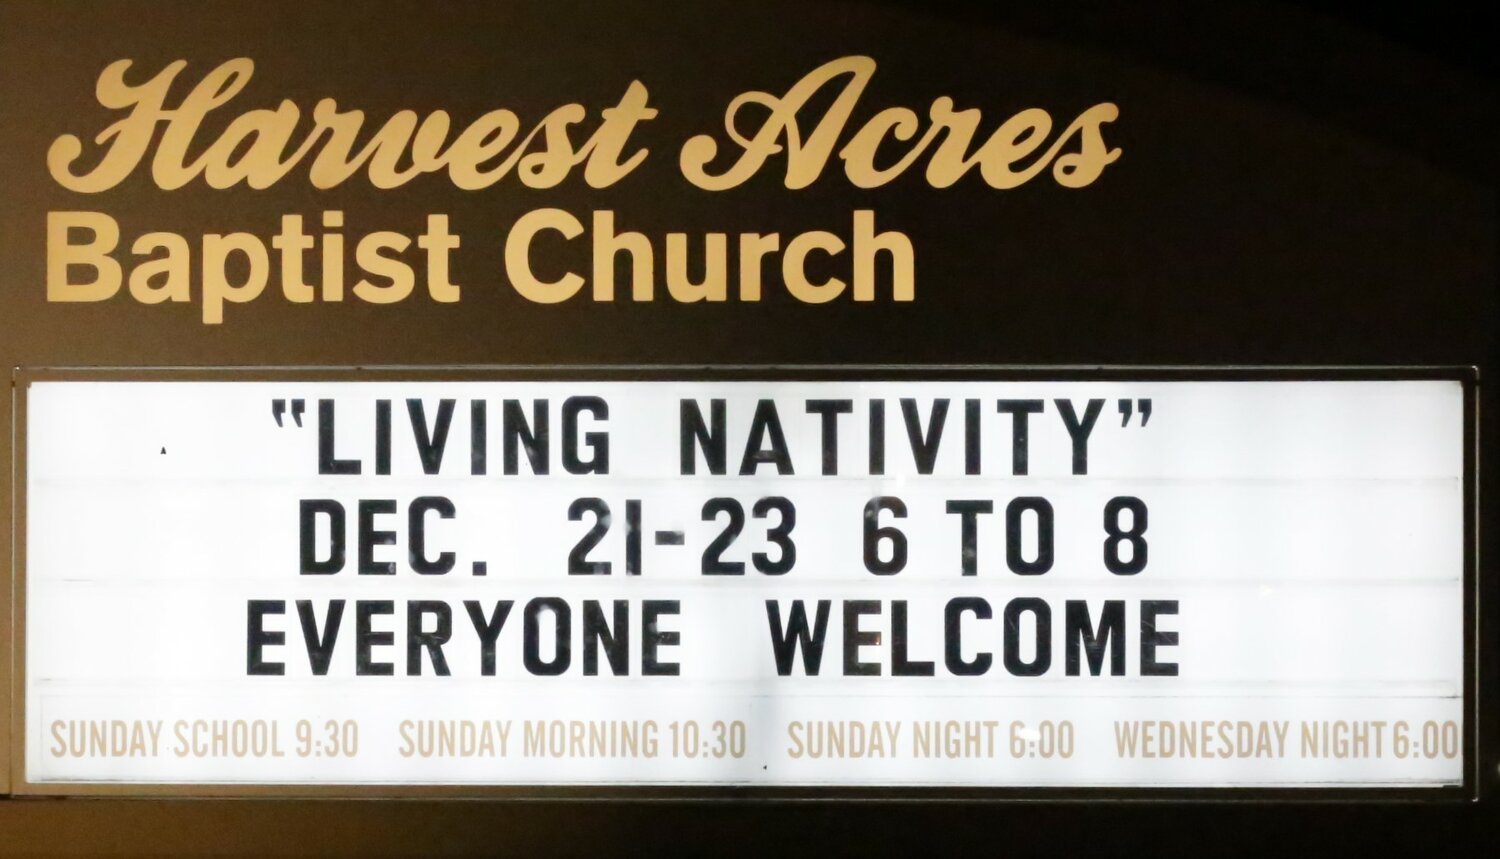 Announcing the live nativity.